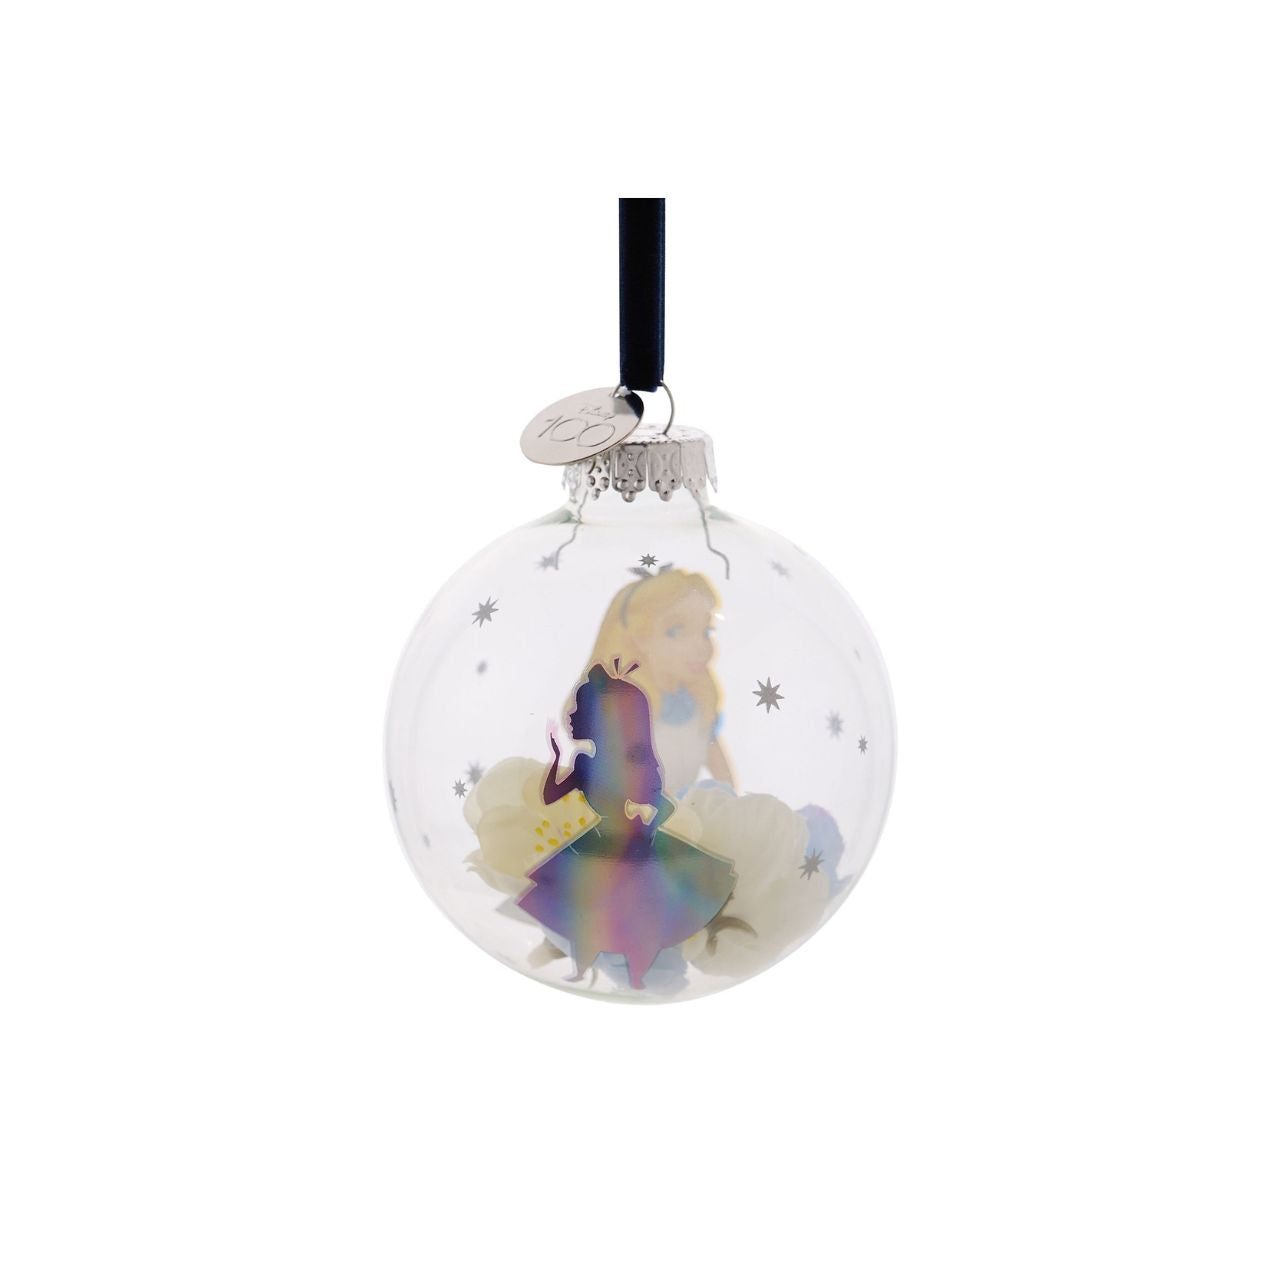 Disney 100th Anniversary Bauble - Alice  An Alice in Wonderland glass bauble from Disney 100 by DISNEY.  This limited edition tree decoration captures the true magic of Disney on its centenary and can be enjoyed by fans of all ages at Christmas.